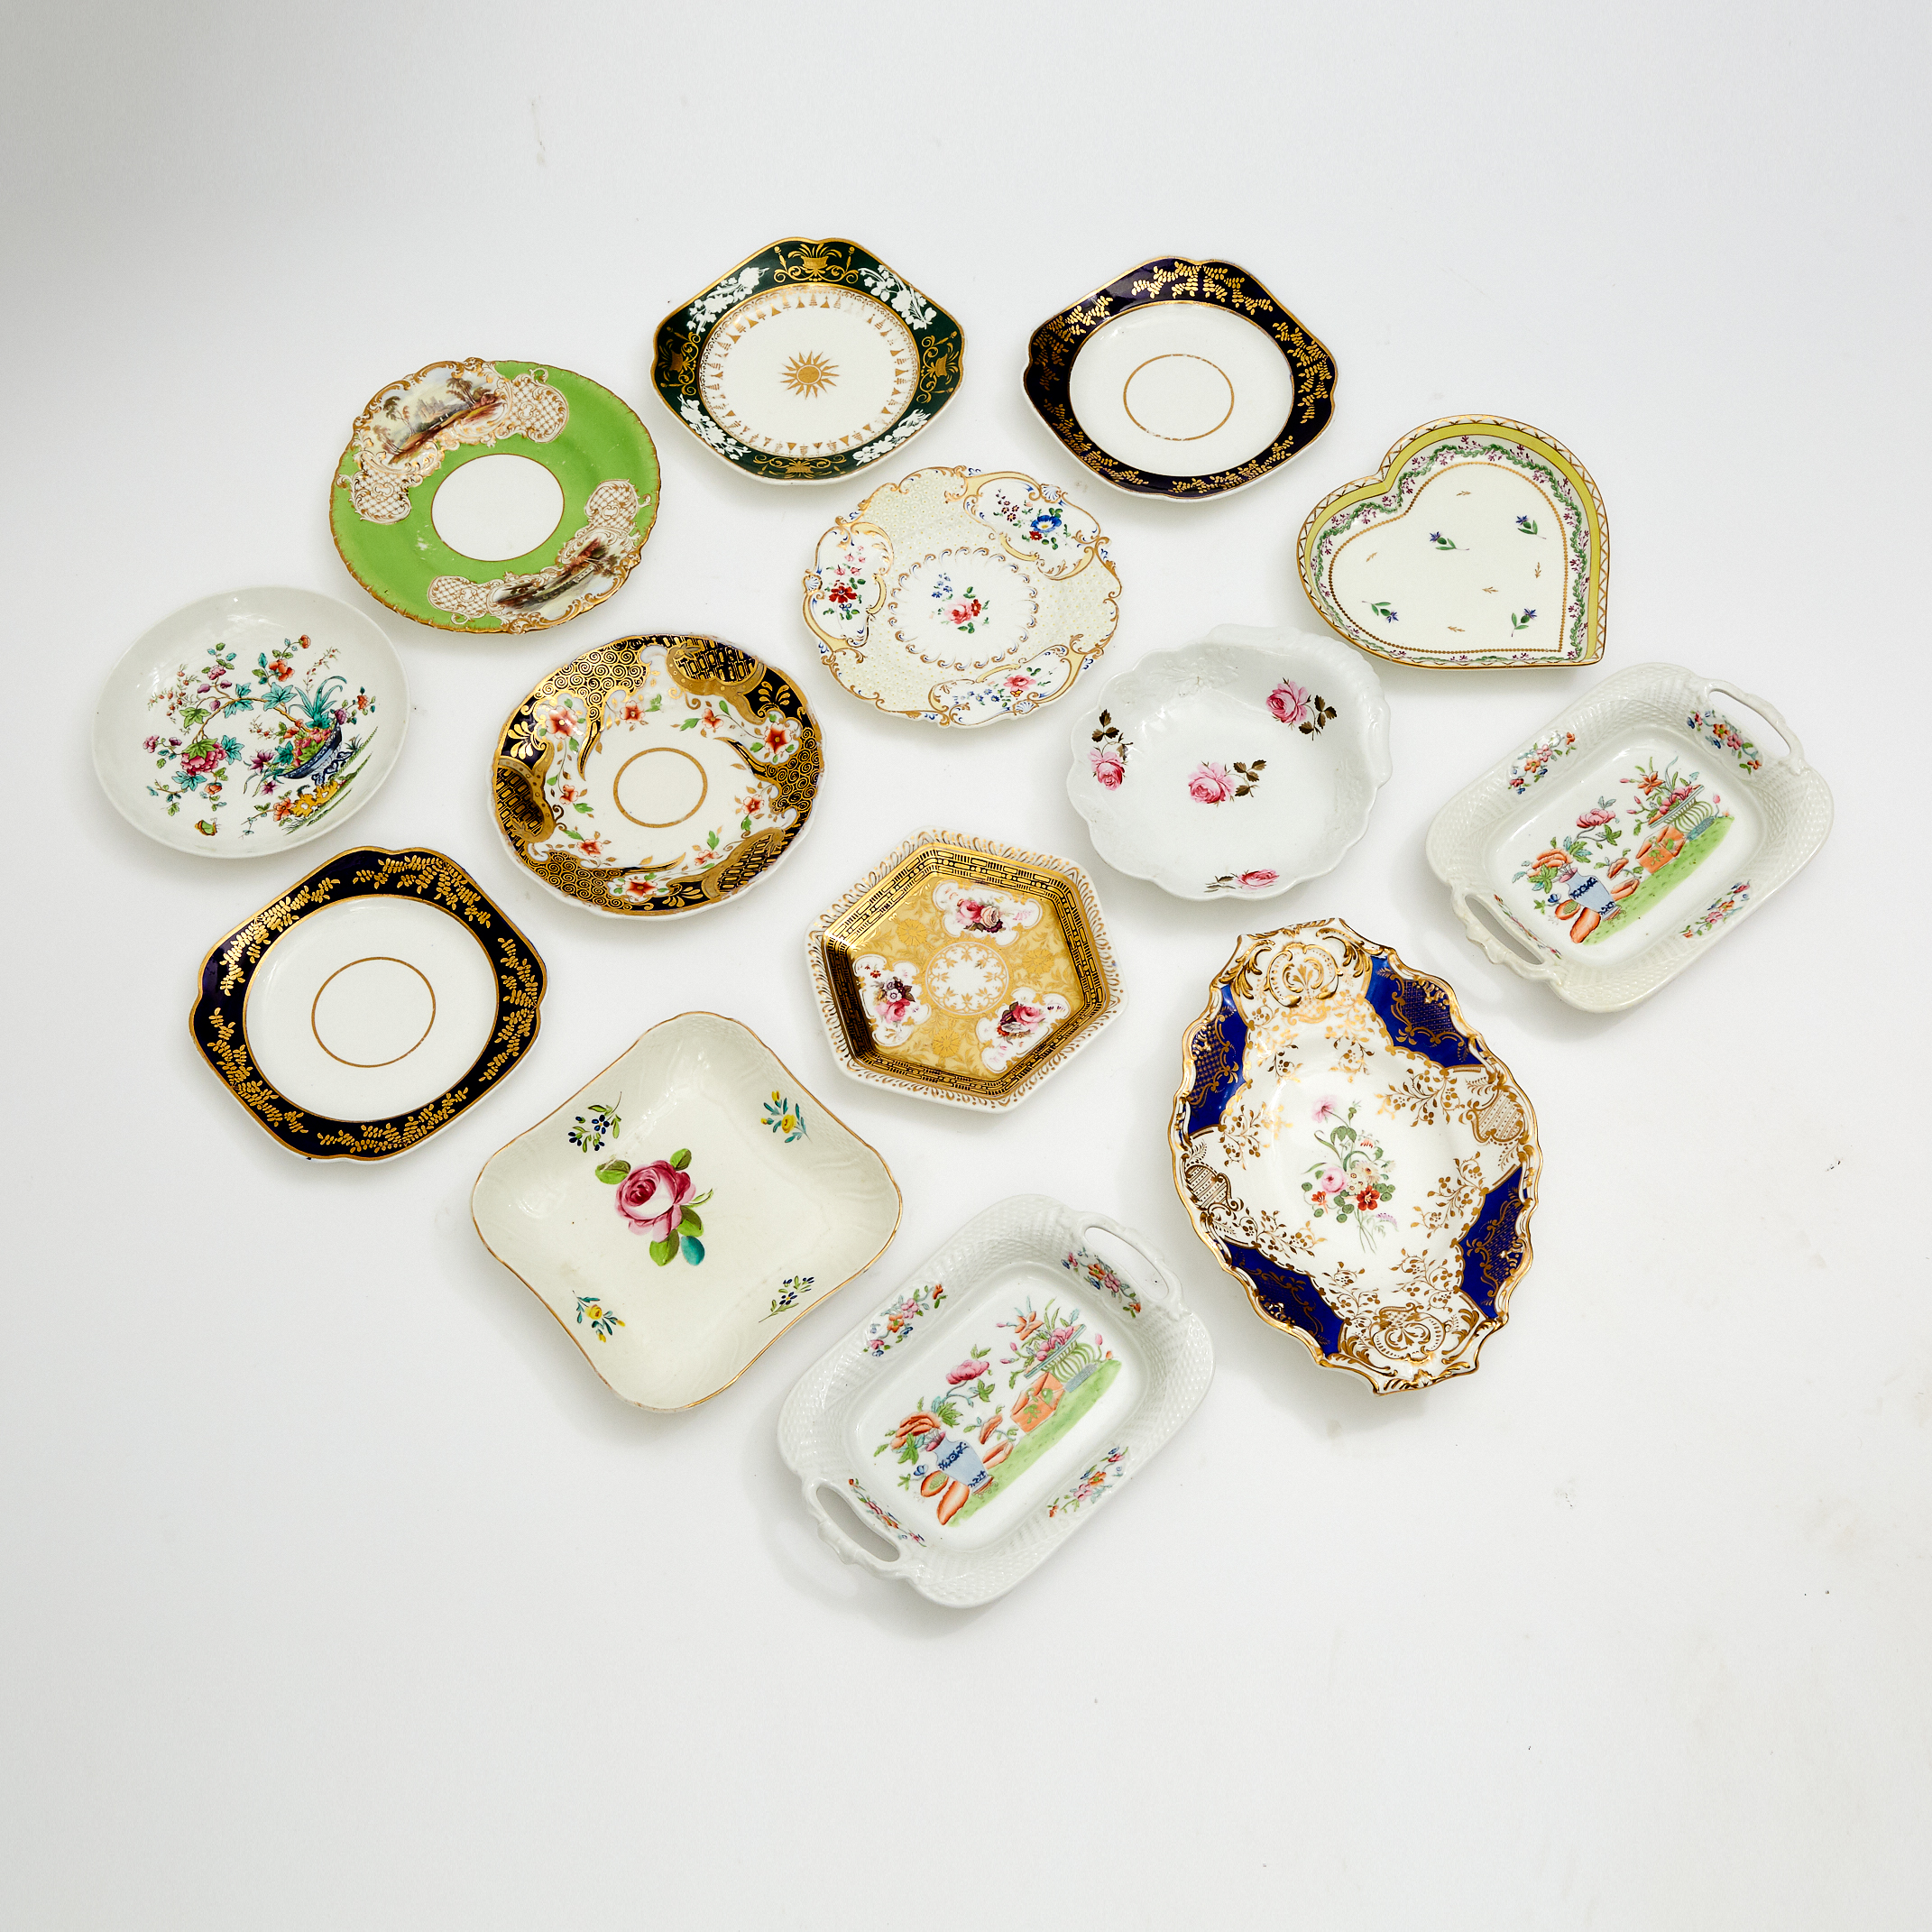 Fourteen Various English Porcelain Serving Dishes, 19th century